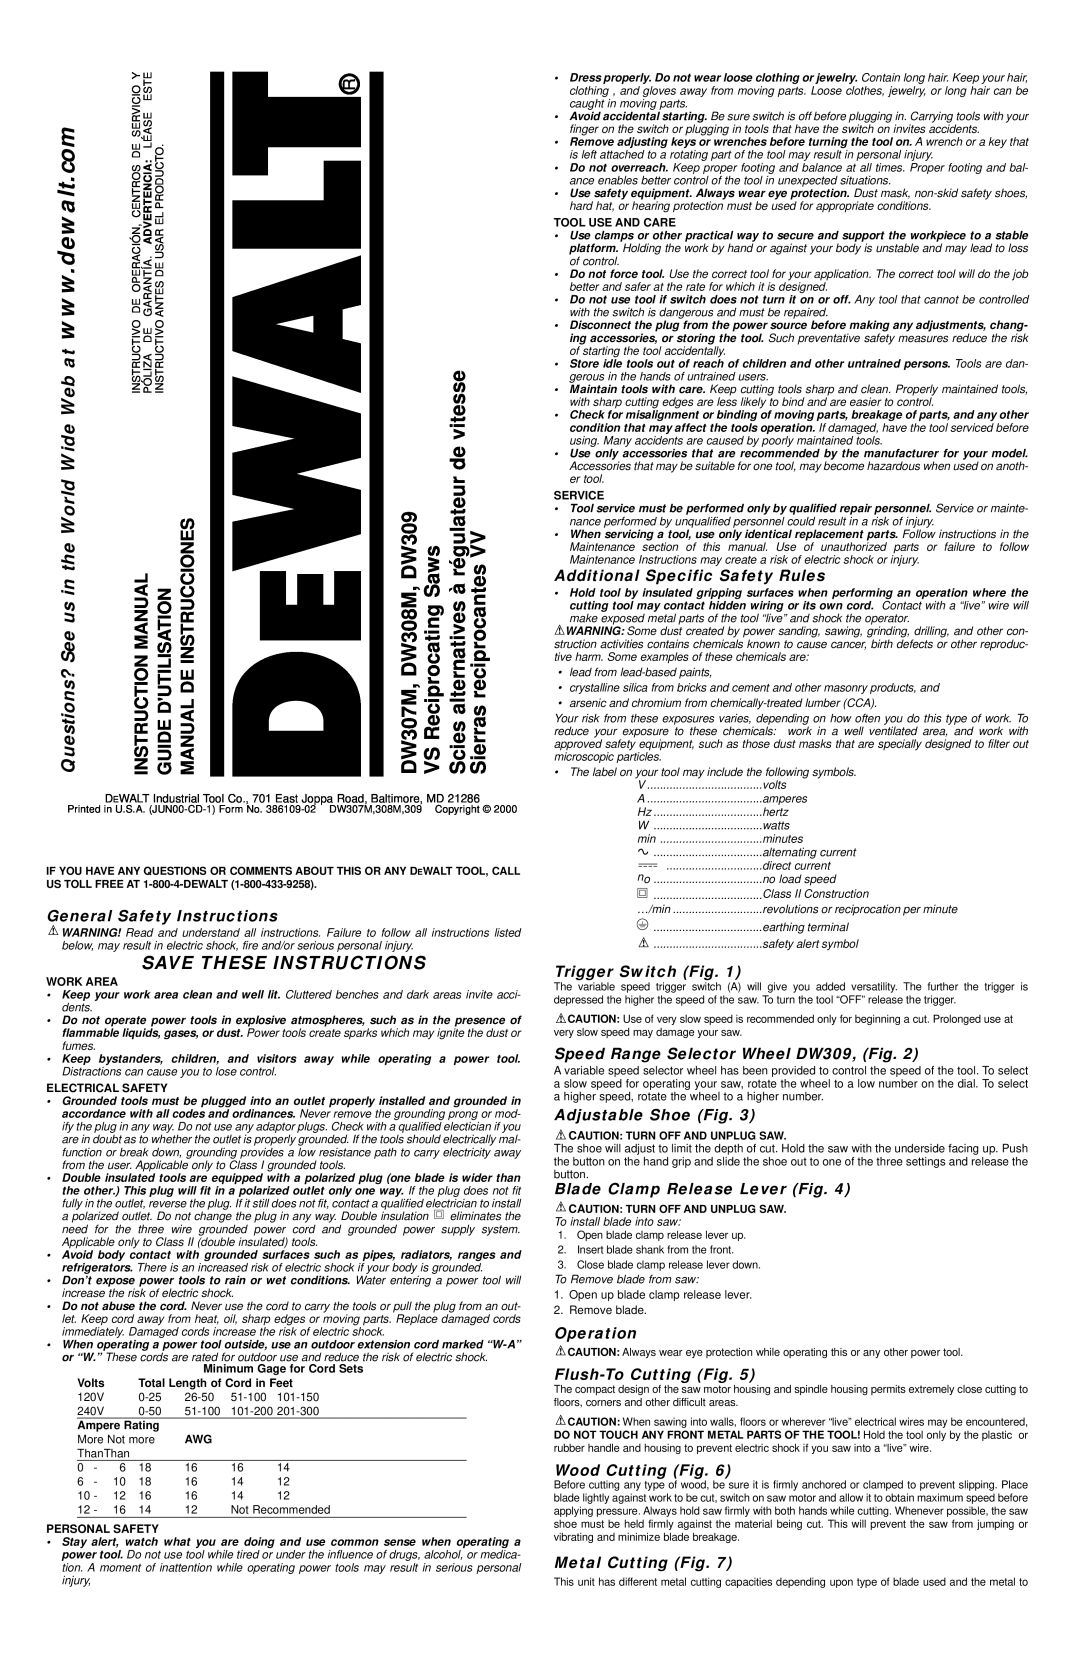 DeWalt instruction manual de vitesse, DW307M, DW308M, DW309, Questions? See us in the World, Save These Instructions 